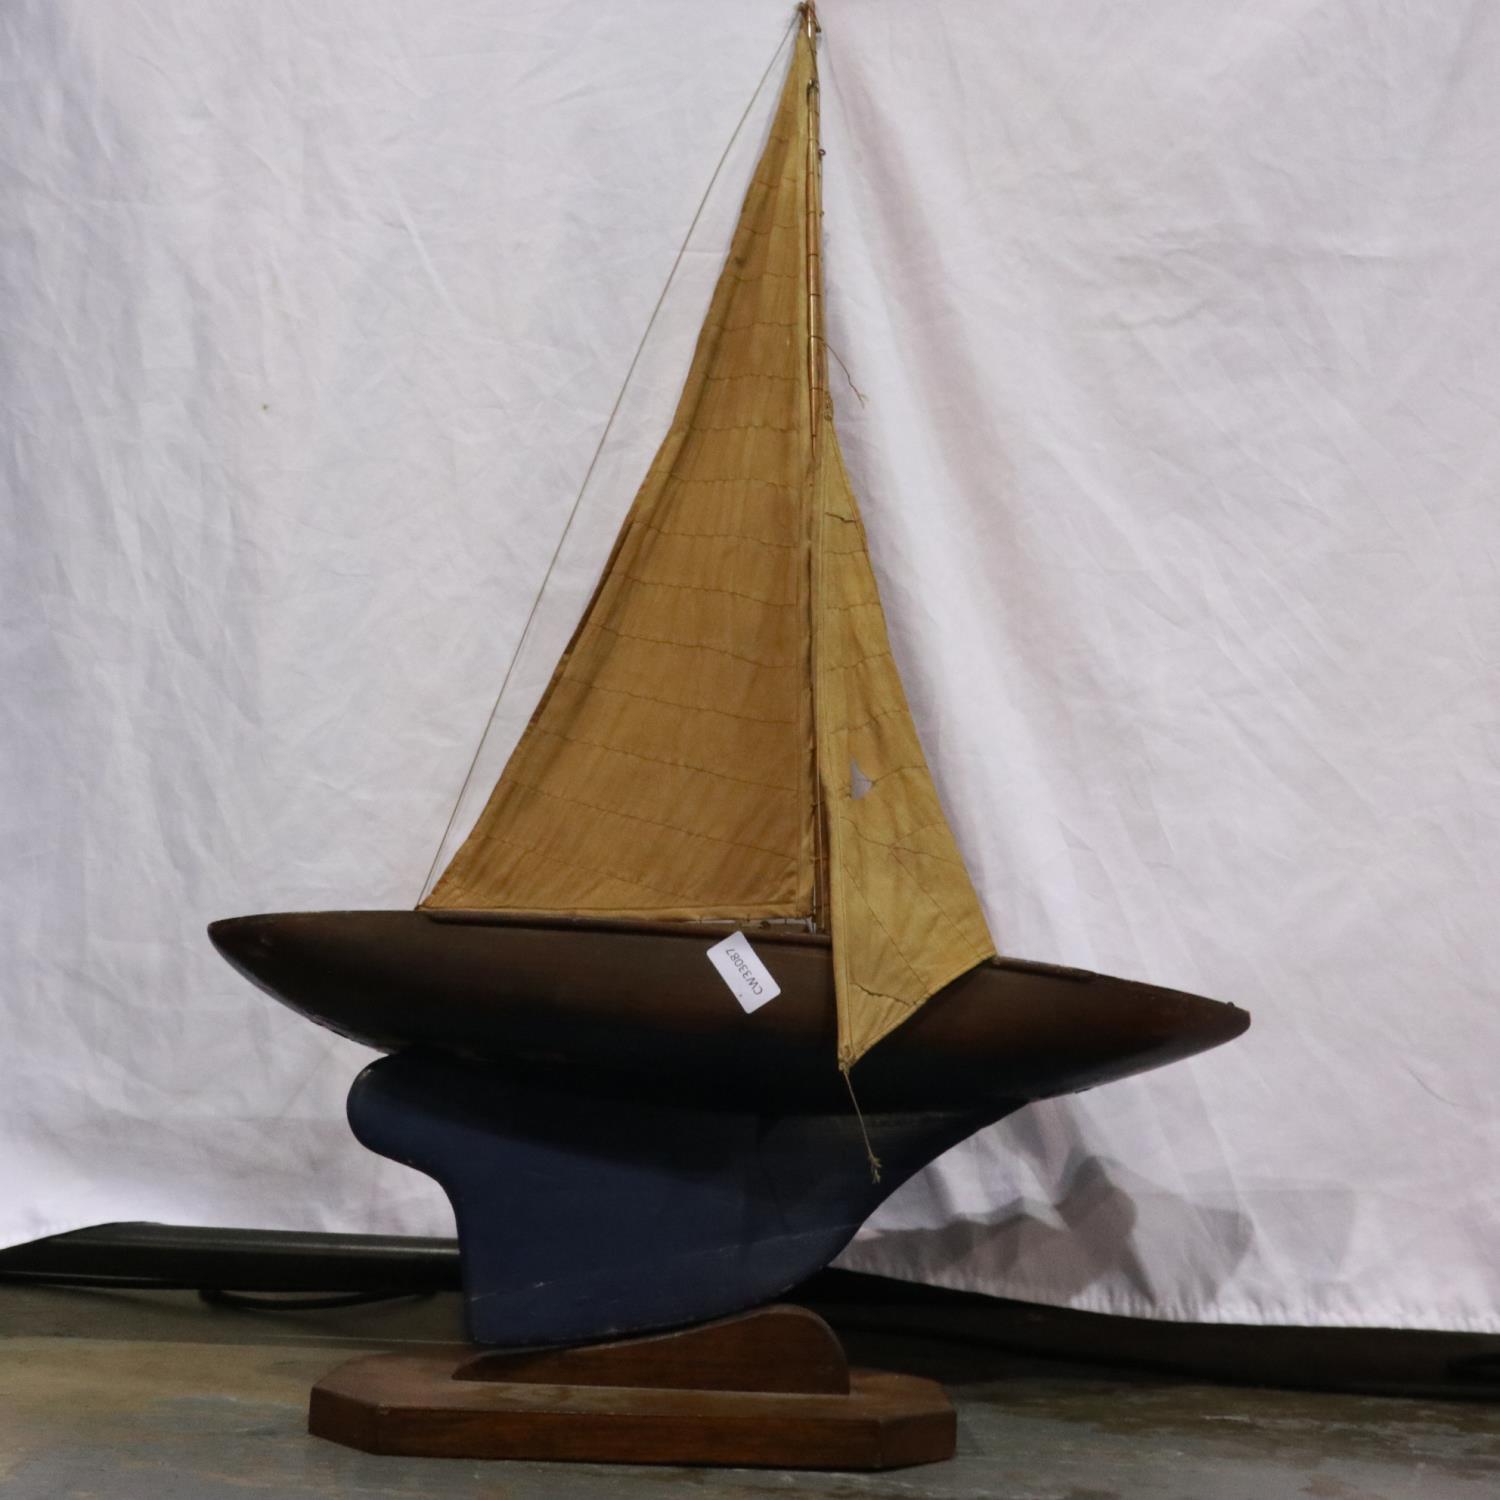 Hardwood hulled vintage pond yacht with cotton sails. Not available for in-house P&P